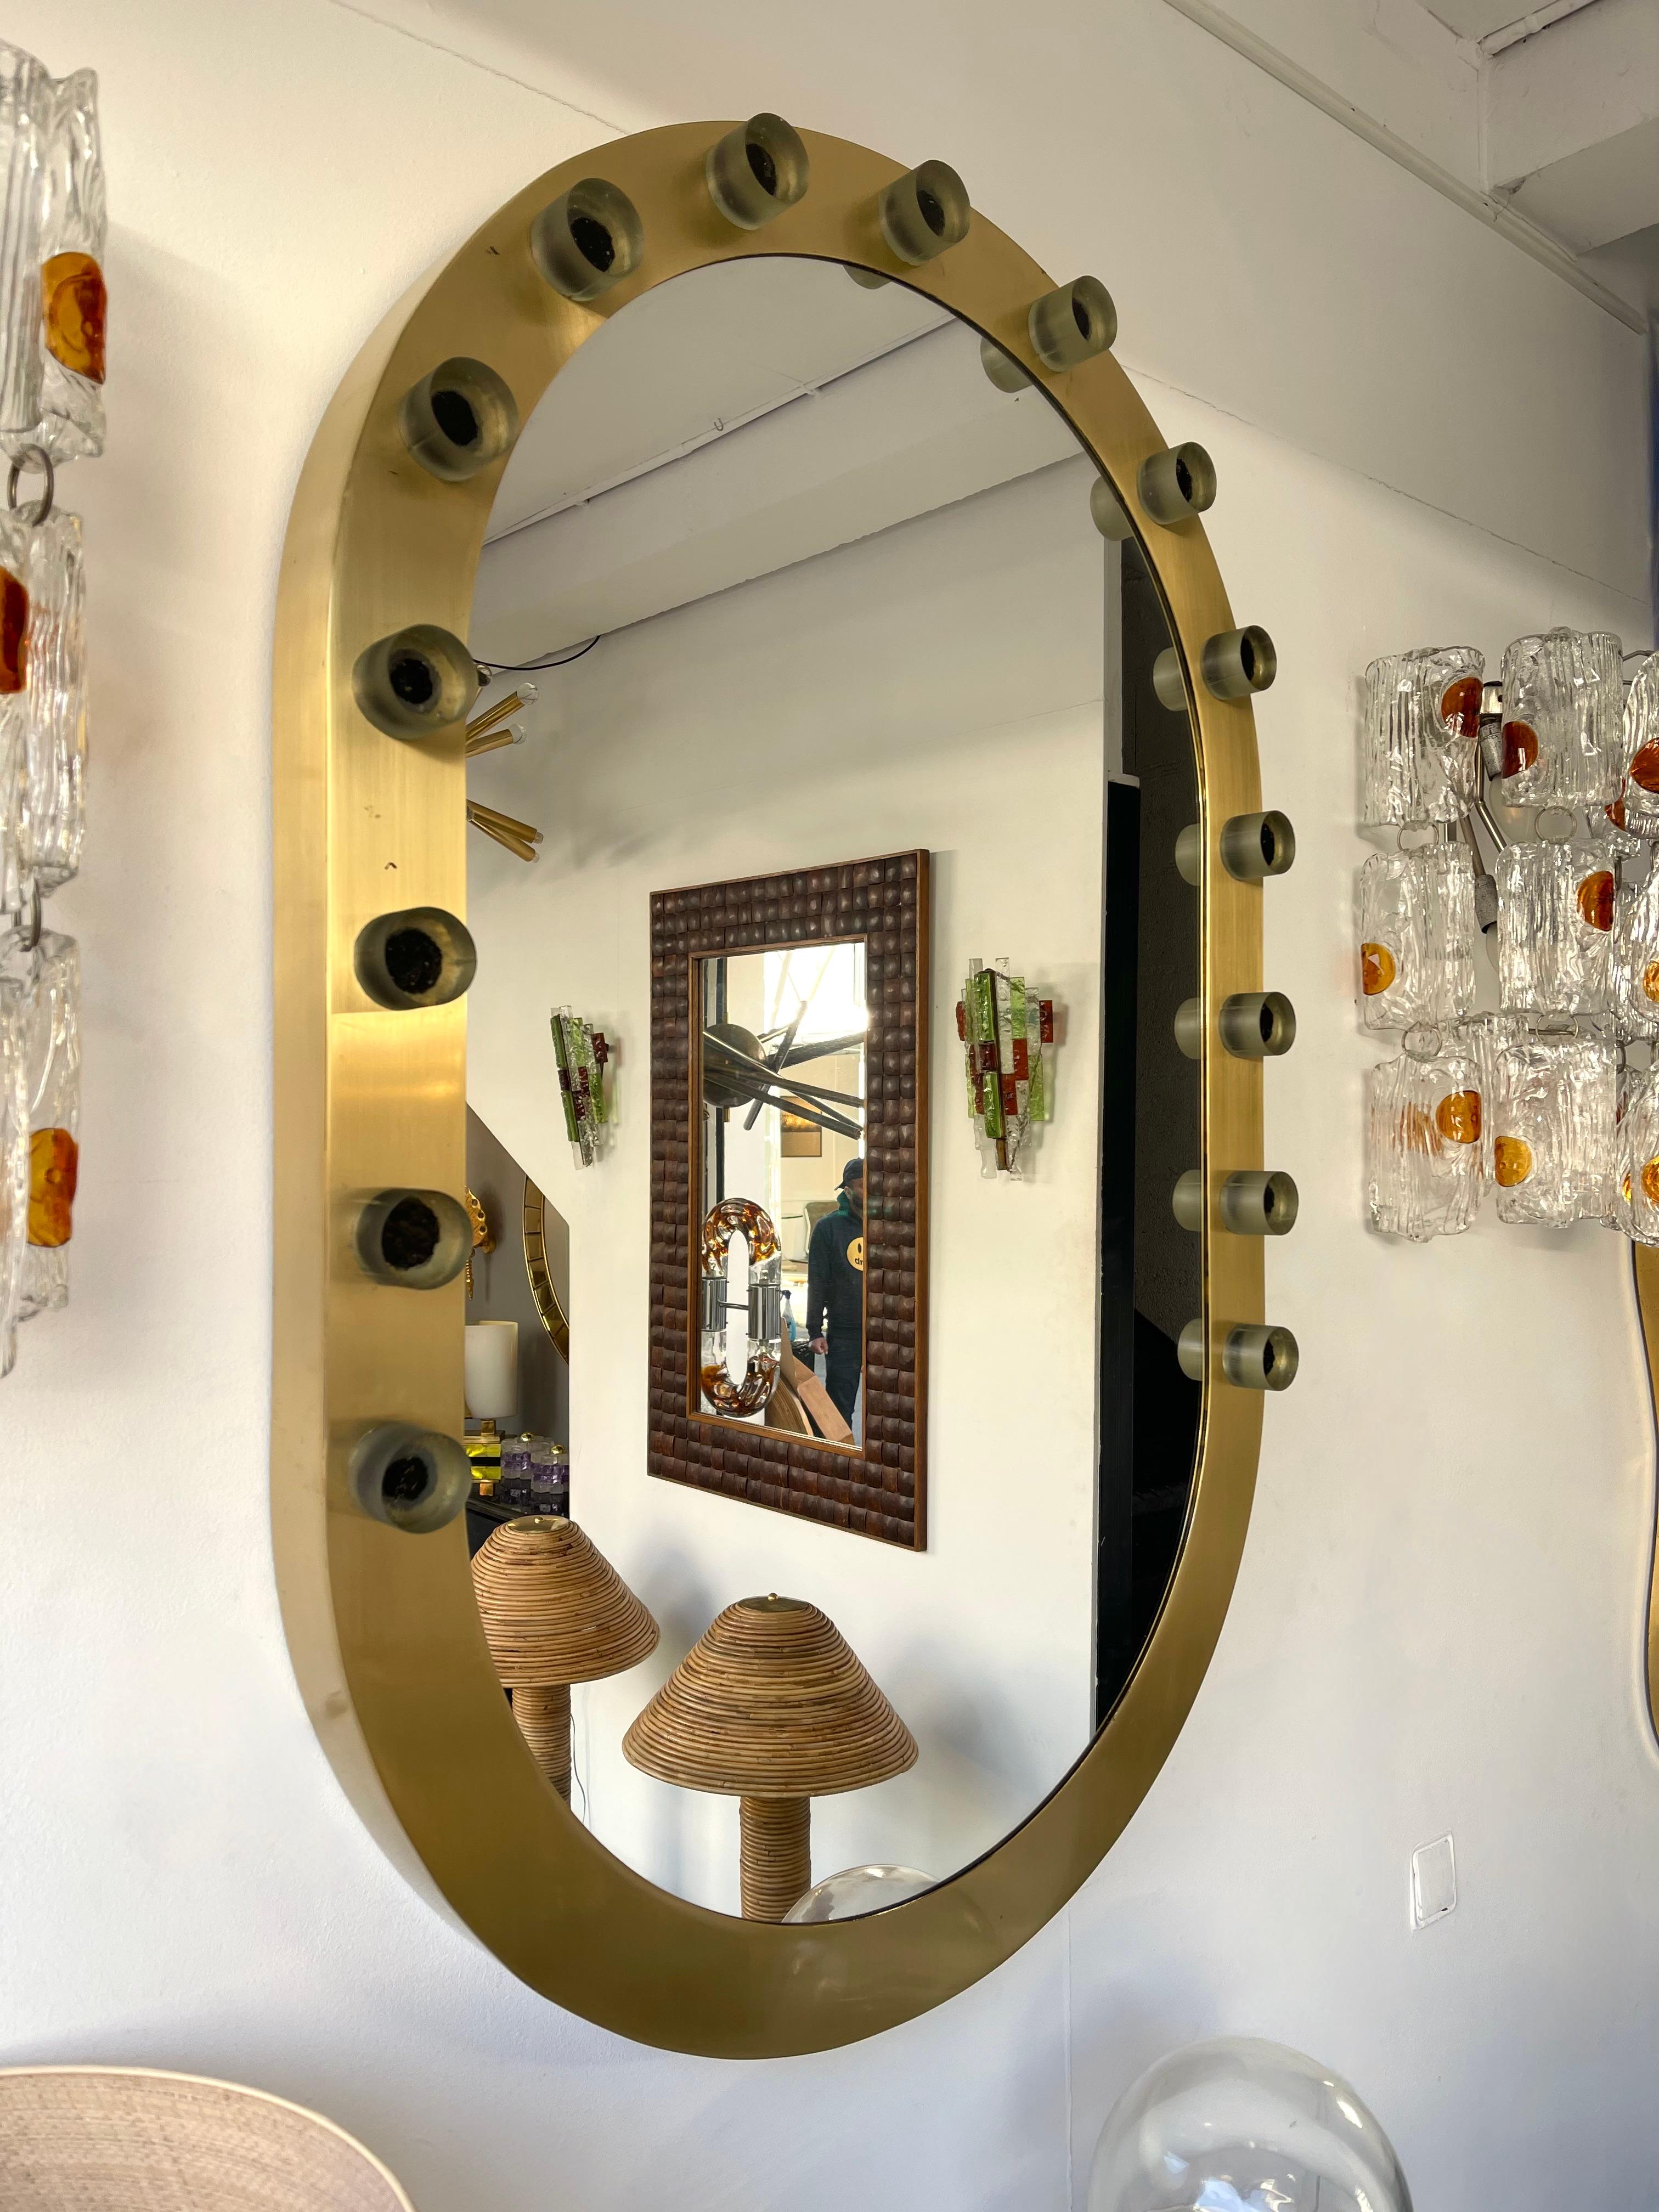 Massive thick side full brass wall mirror with glass cabochon decor, In the mood of Mid-Century Modern Space Age style, Hollywood Regency.